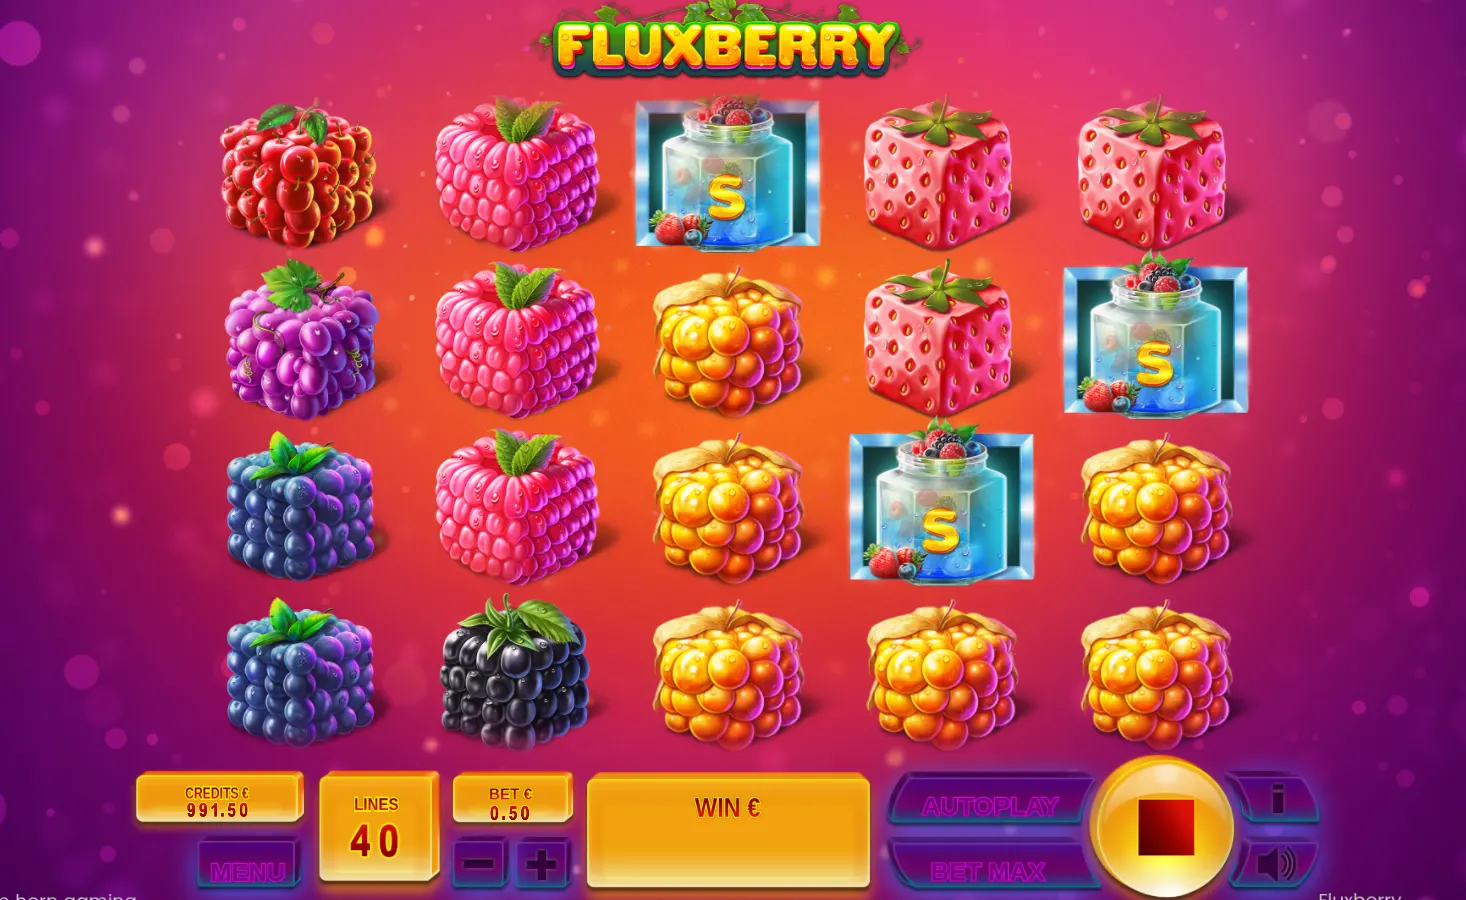 Fluxberry Theme, Graphics, and Sounds